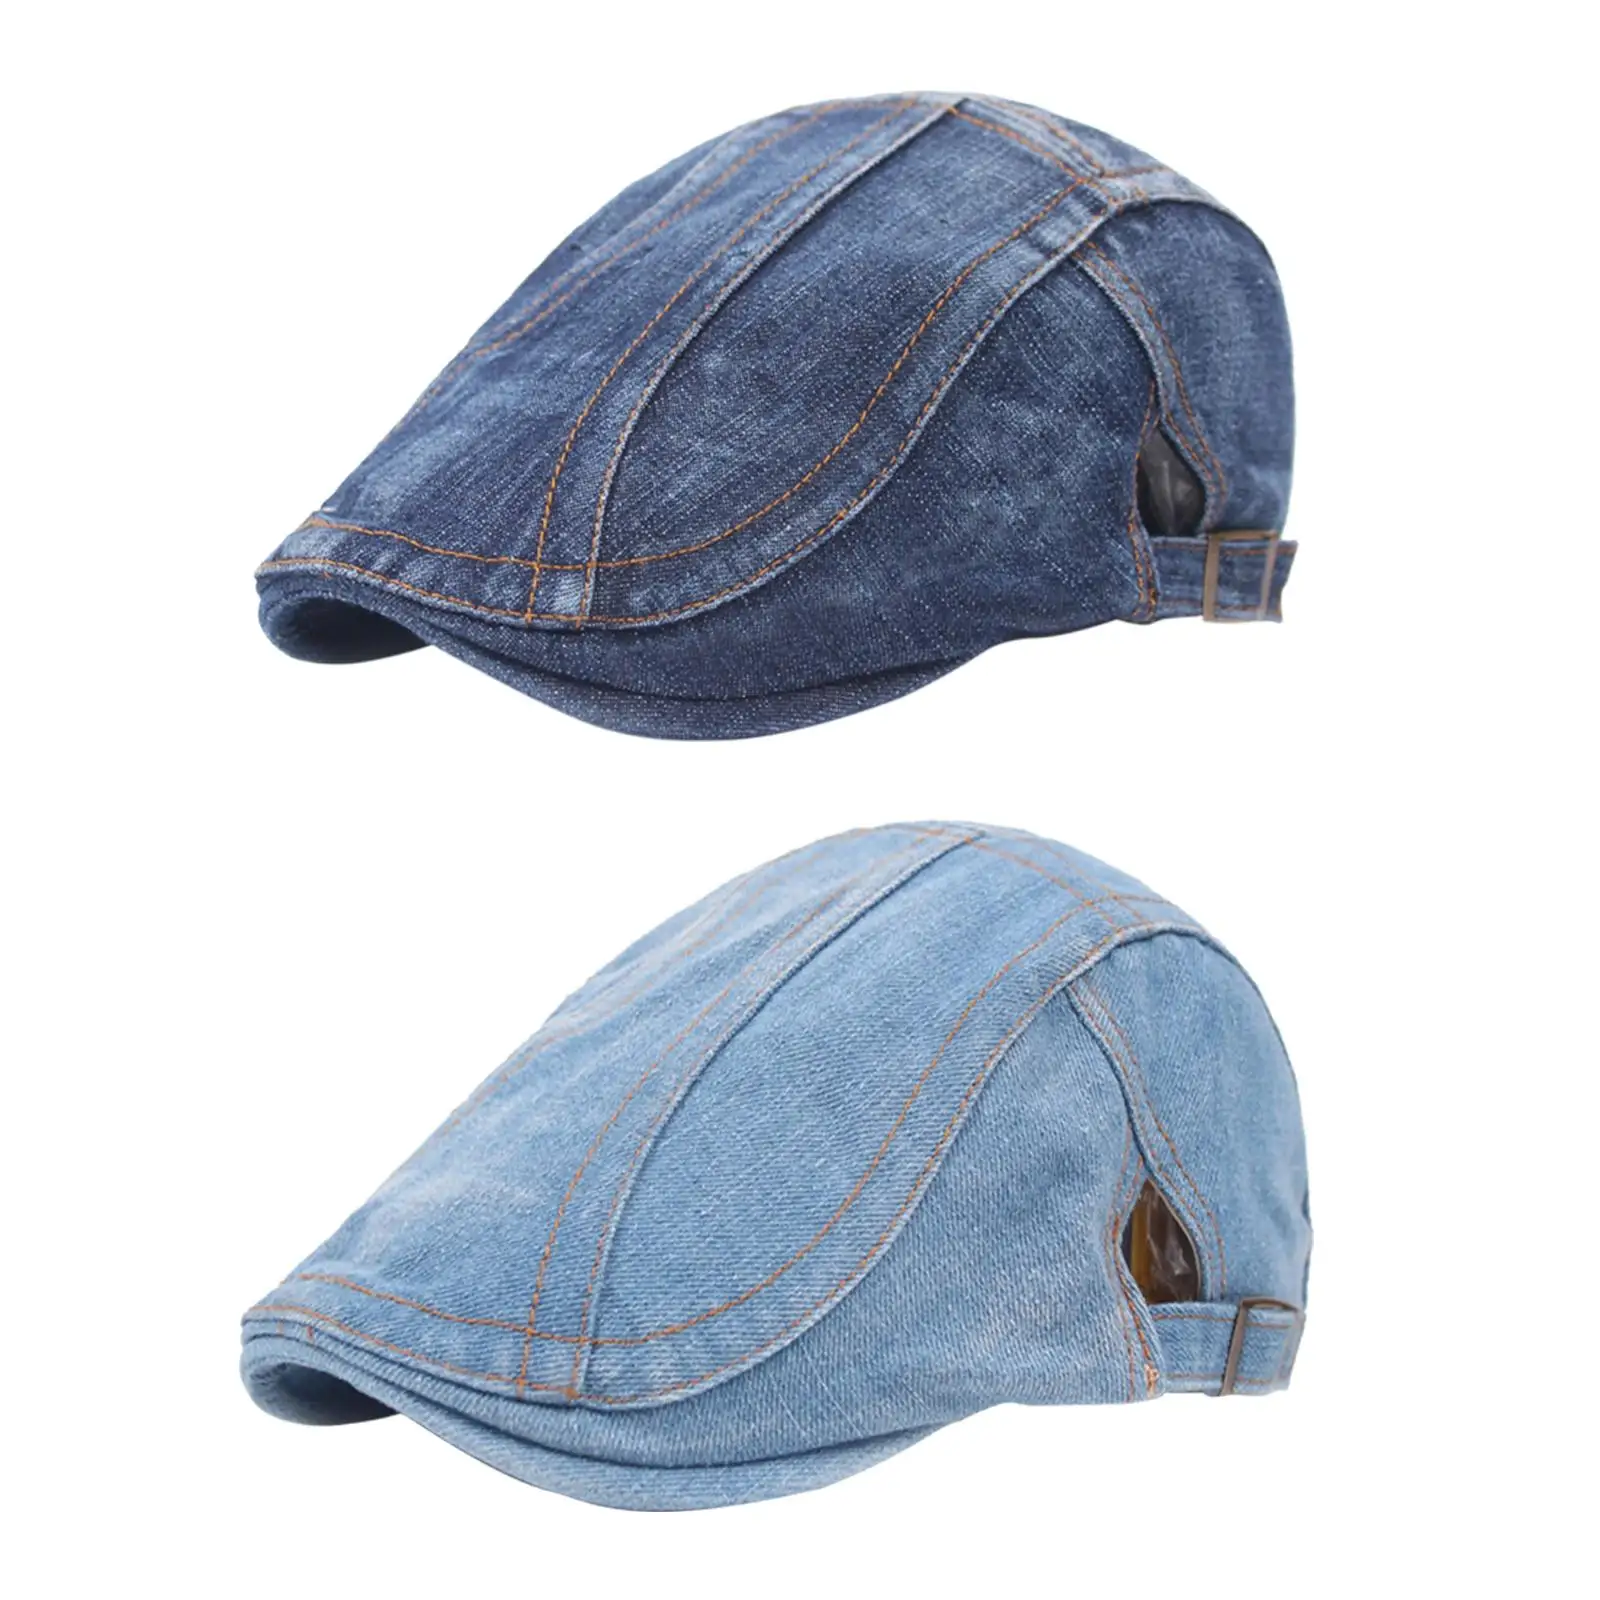 Unisex Newsboy Hat/ Flat  Hunting Ivy Snap Driving Cabbie  Caps/ for Men Women Washable Washed Jean/